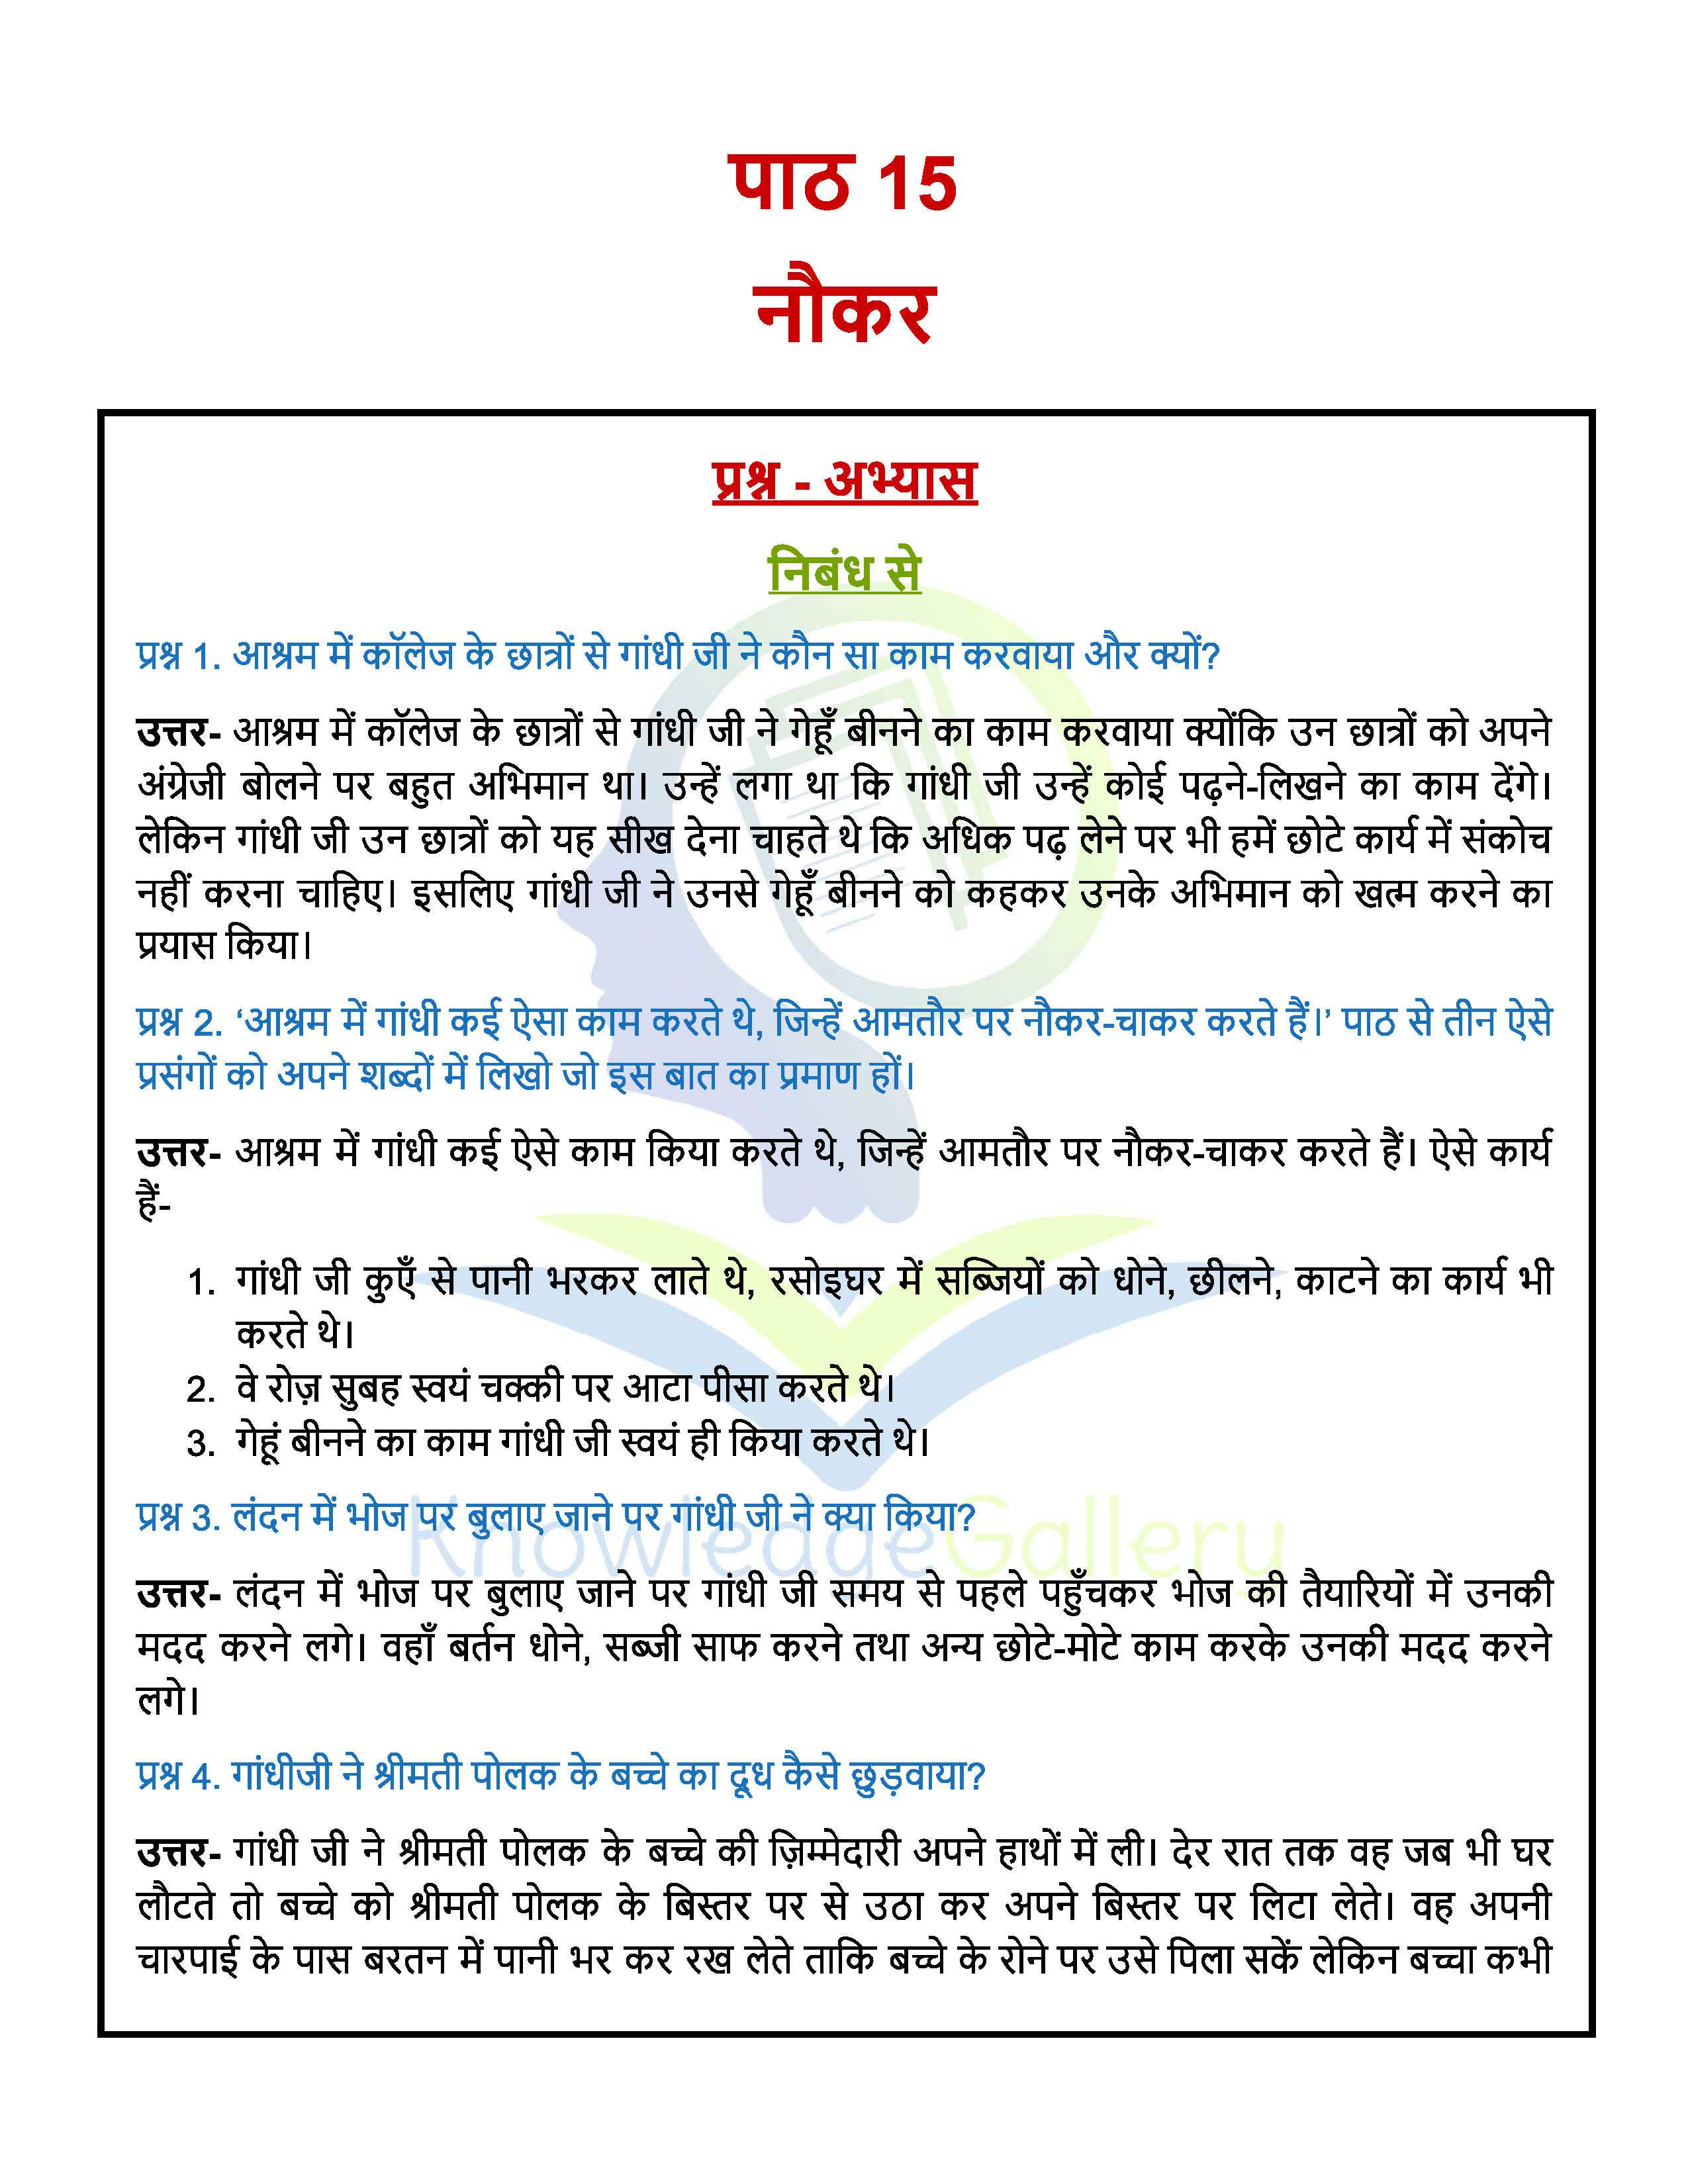 NCERT Solution For Class 6 Hindi Chapter 15 part 1